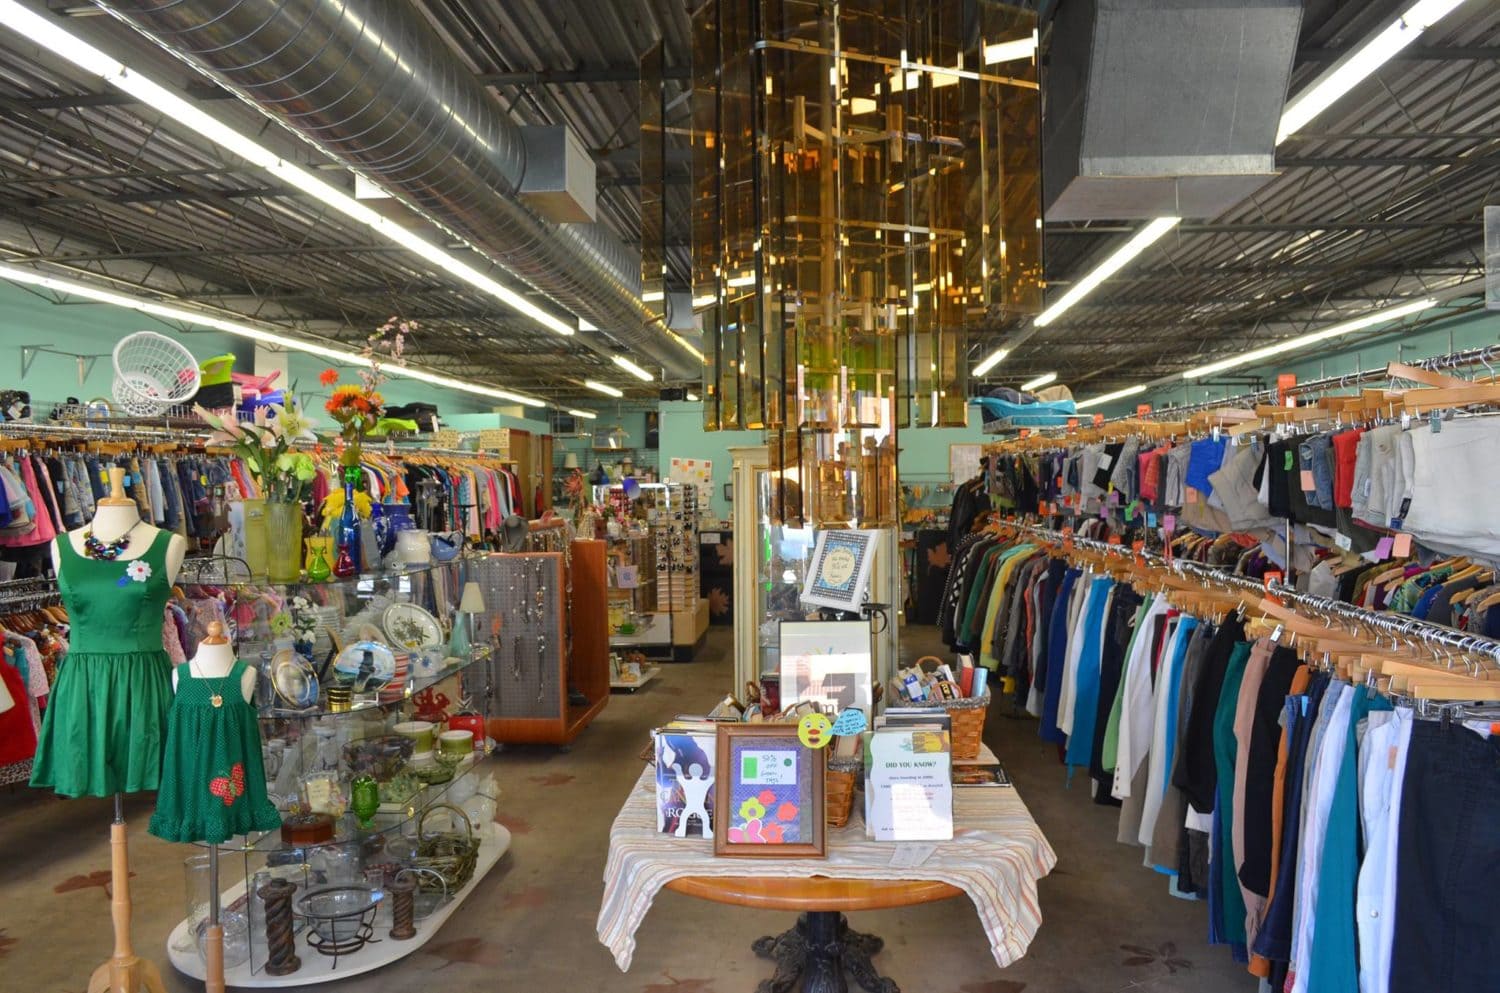 An interior photo of Family Tree Resale showing racks of clothing and tables with jewelry and home decor